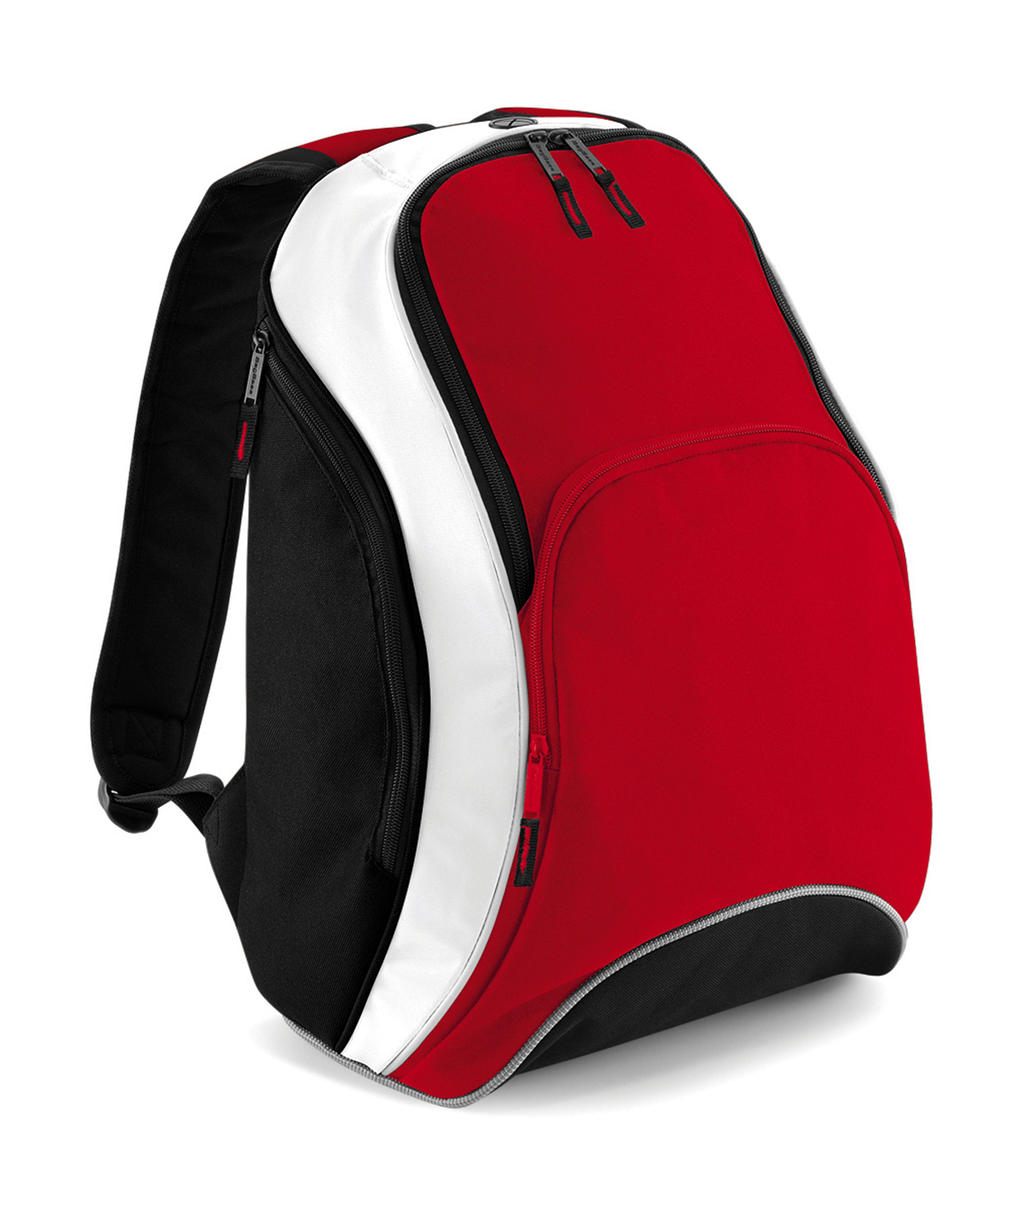  Teamwear Backpack in Farbe Classic Red/Black/White